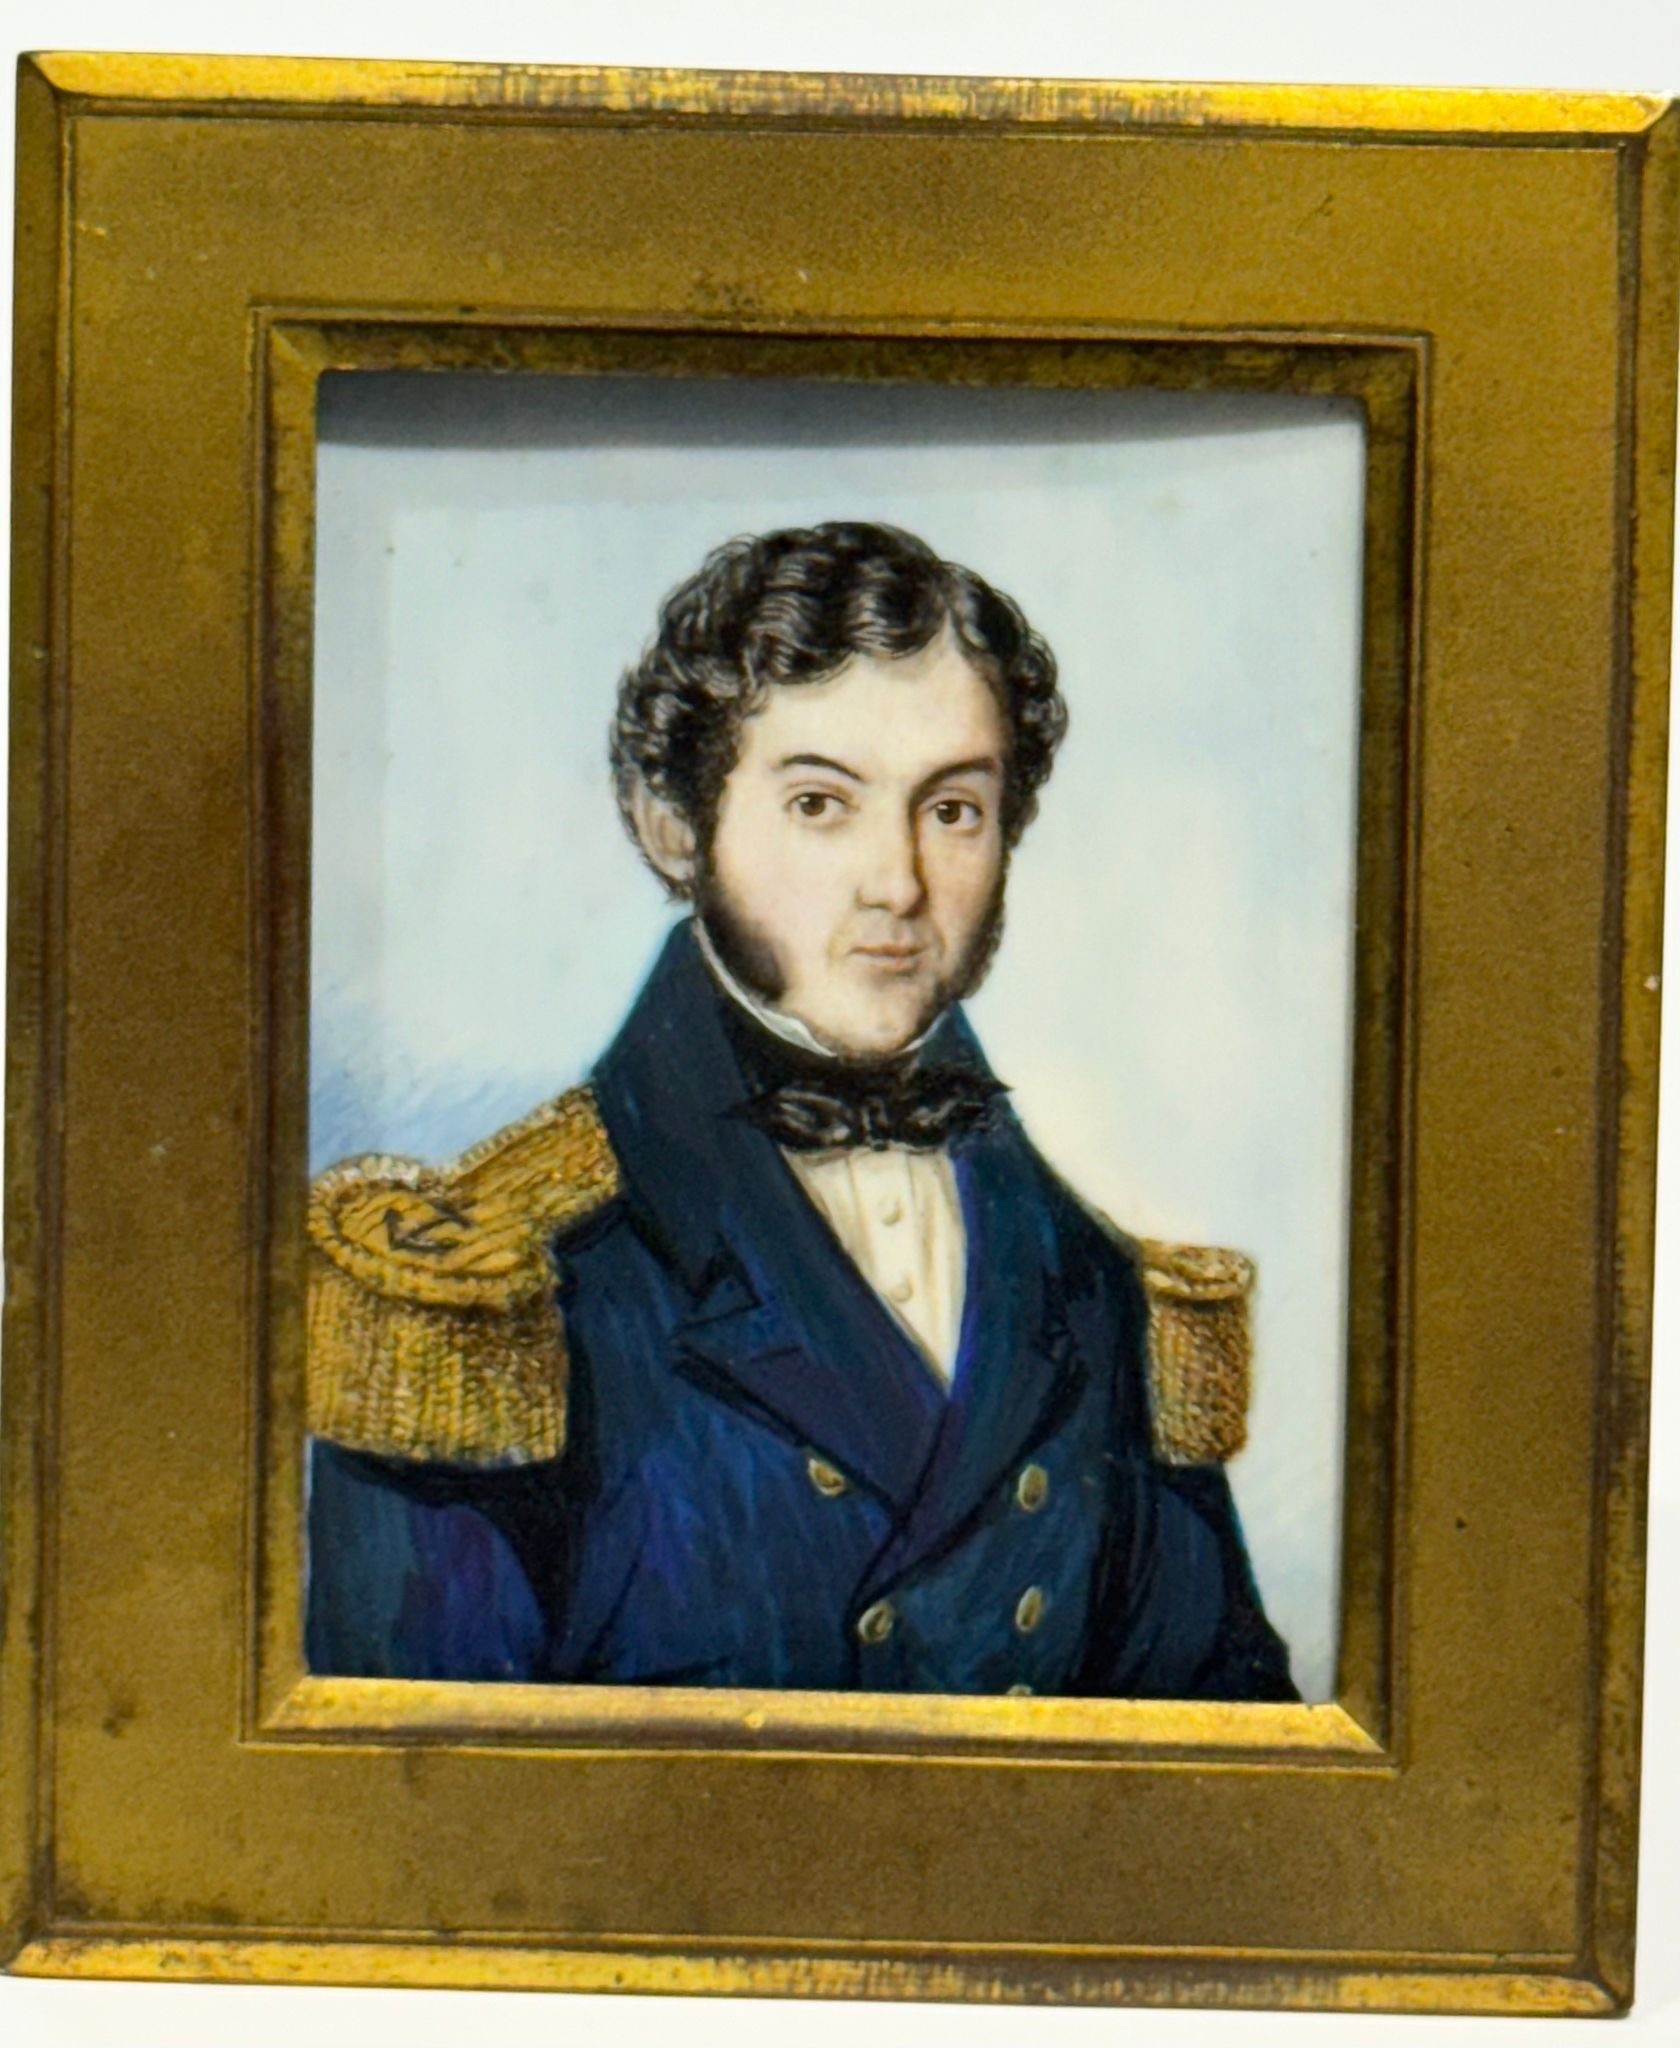 A Mid-19th century rectangular portrait miniature of a Naval Commander, with black curly hair and